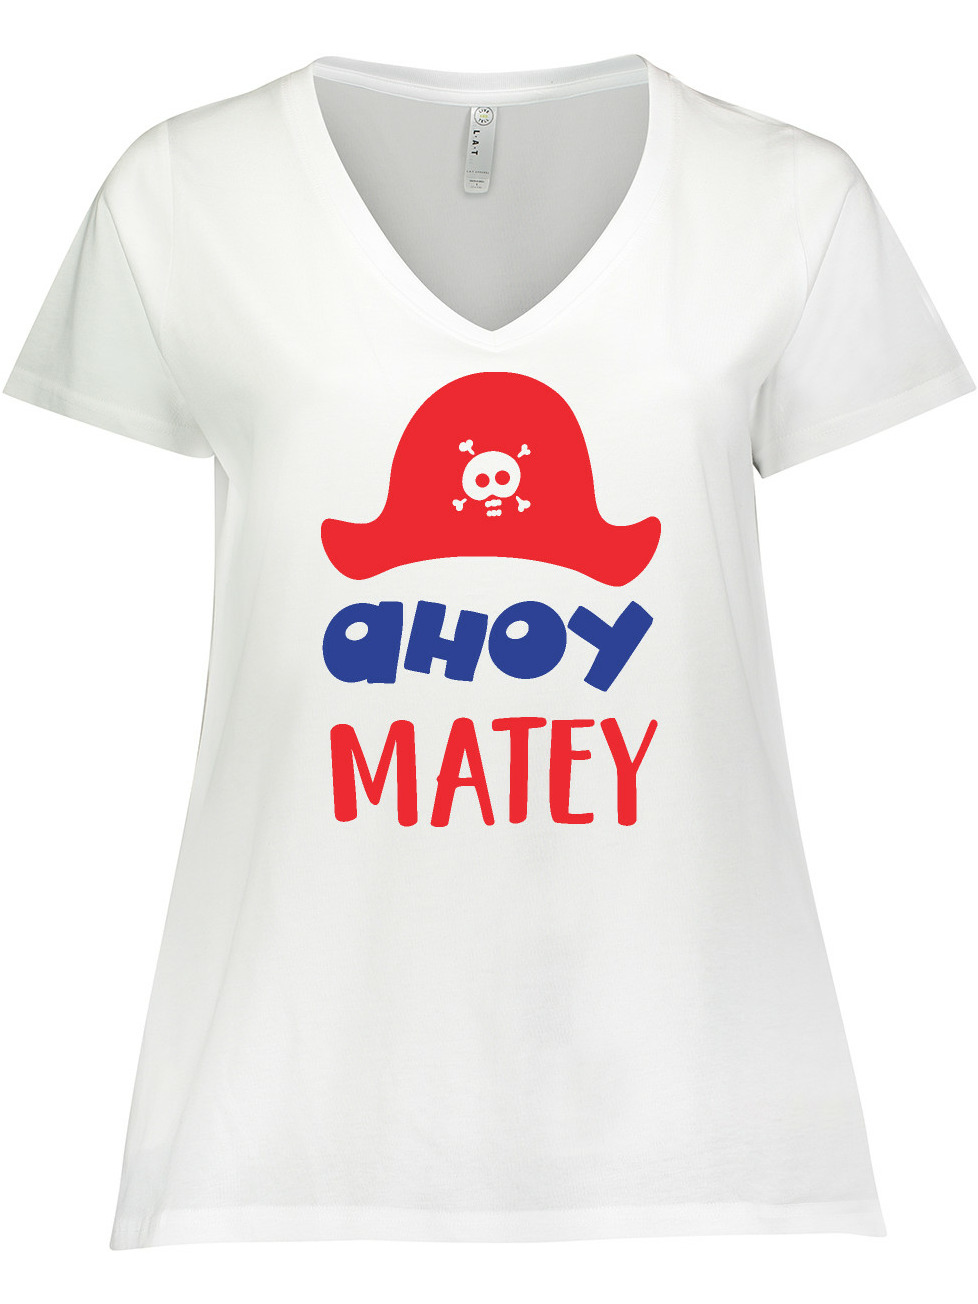 Inktastic Ahoy Matey, Pirate Hat, Skull and Bones, Pirates Women's Plus Size V-Neck T-Shirt - image 1 of 4